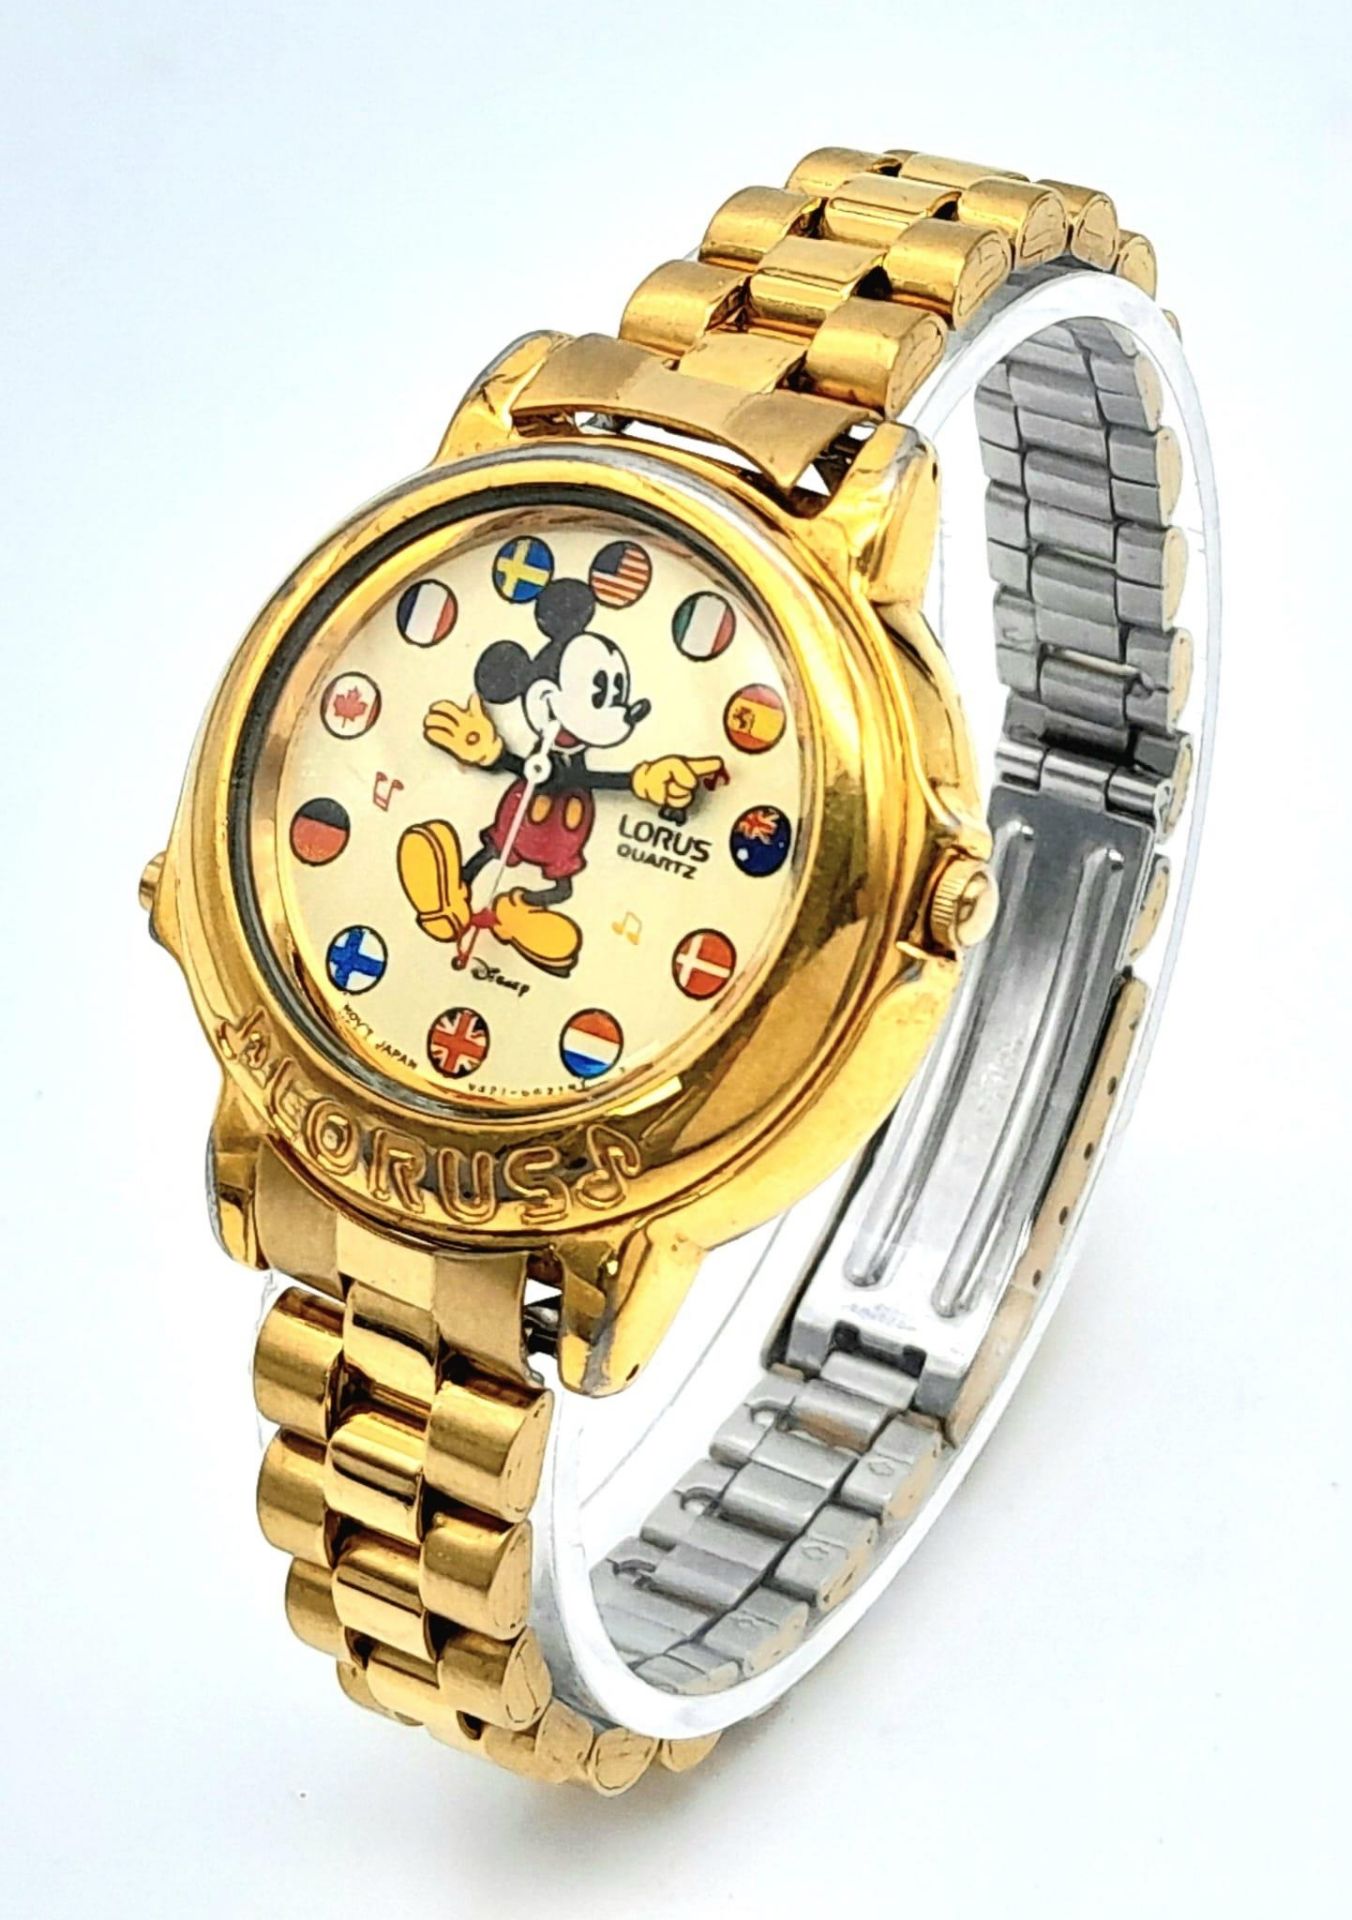 A Lorus Mickey Mouse Musical Quartz Watch. Gilded stainless steel bracelet and case - 34mm. MM